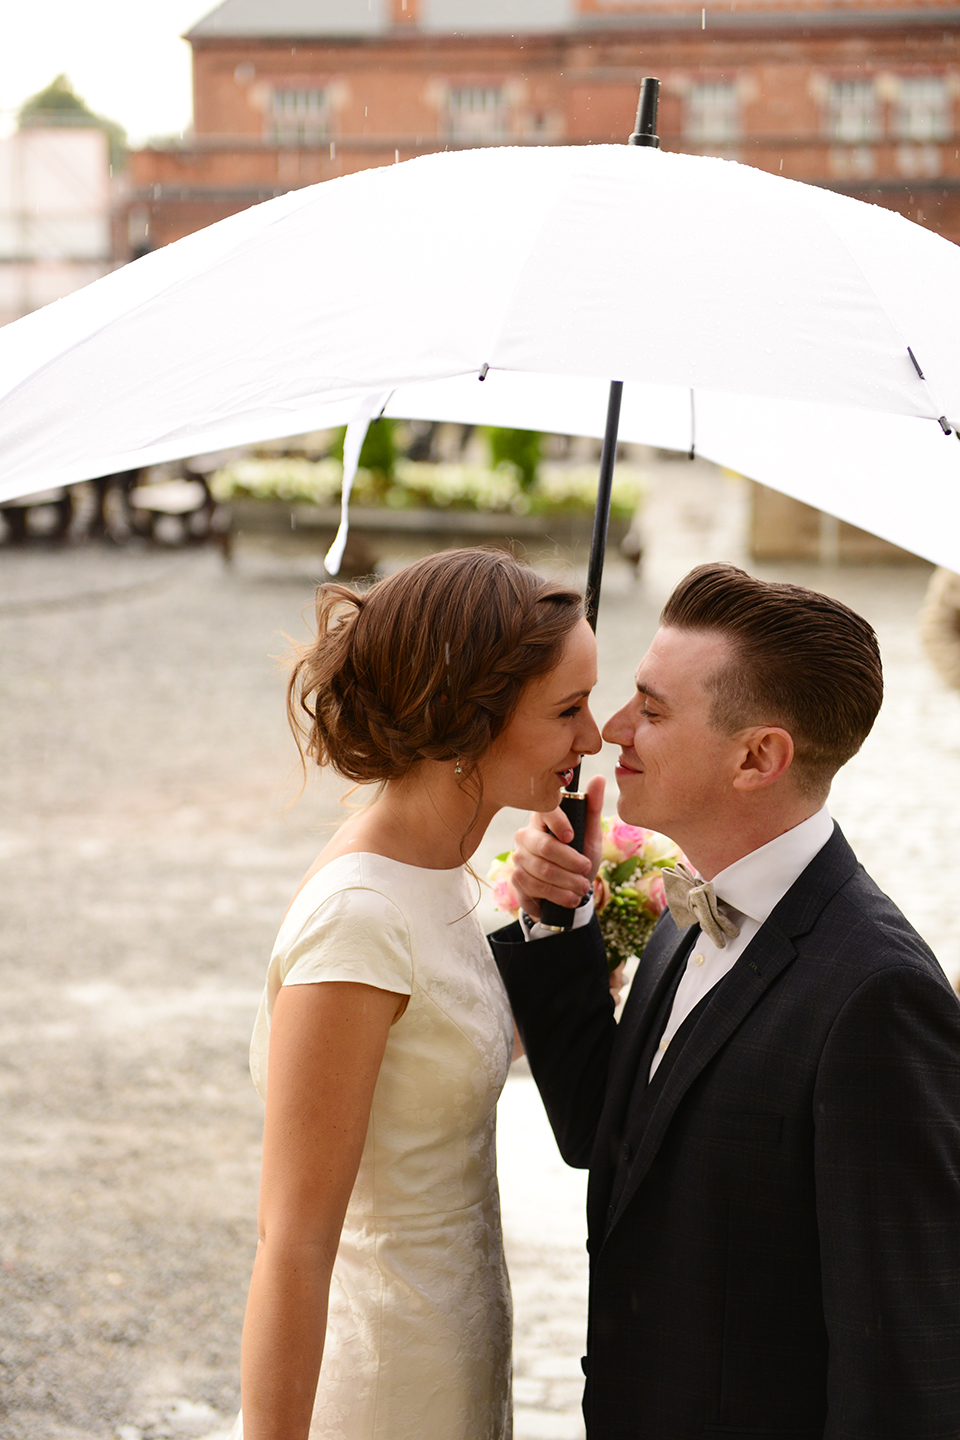 Getting married in the rain